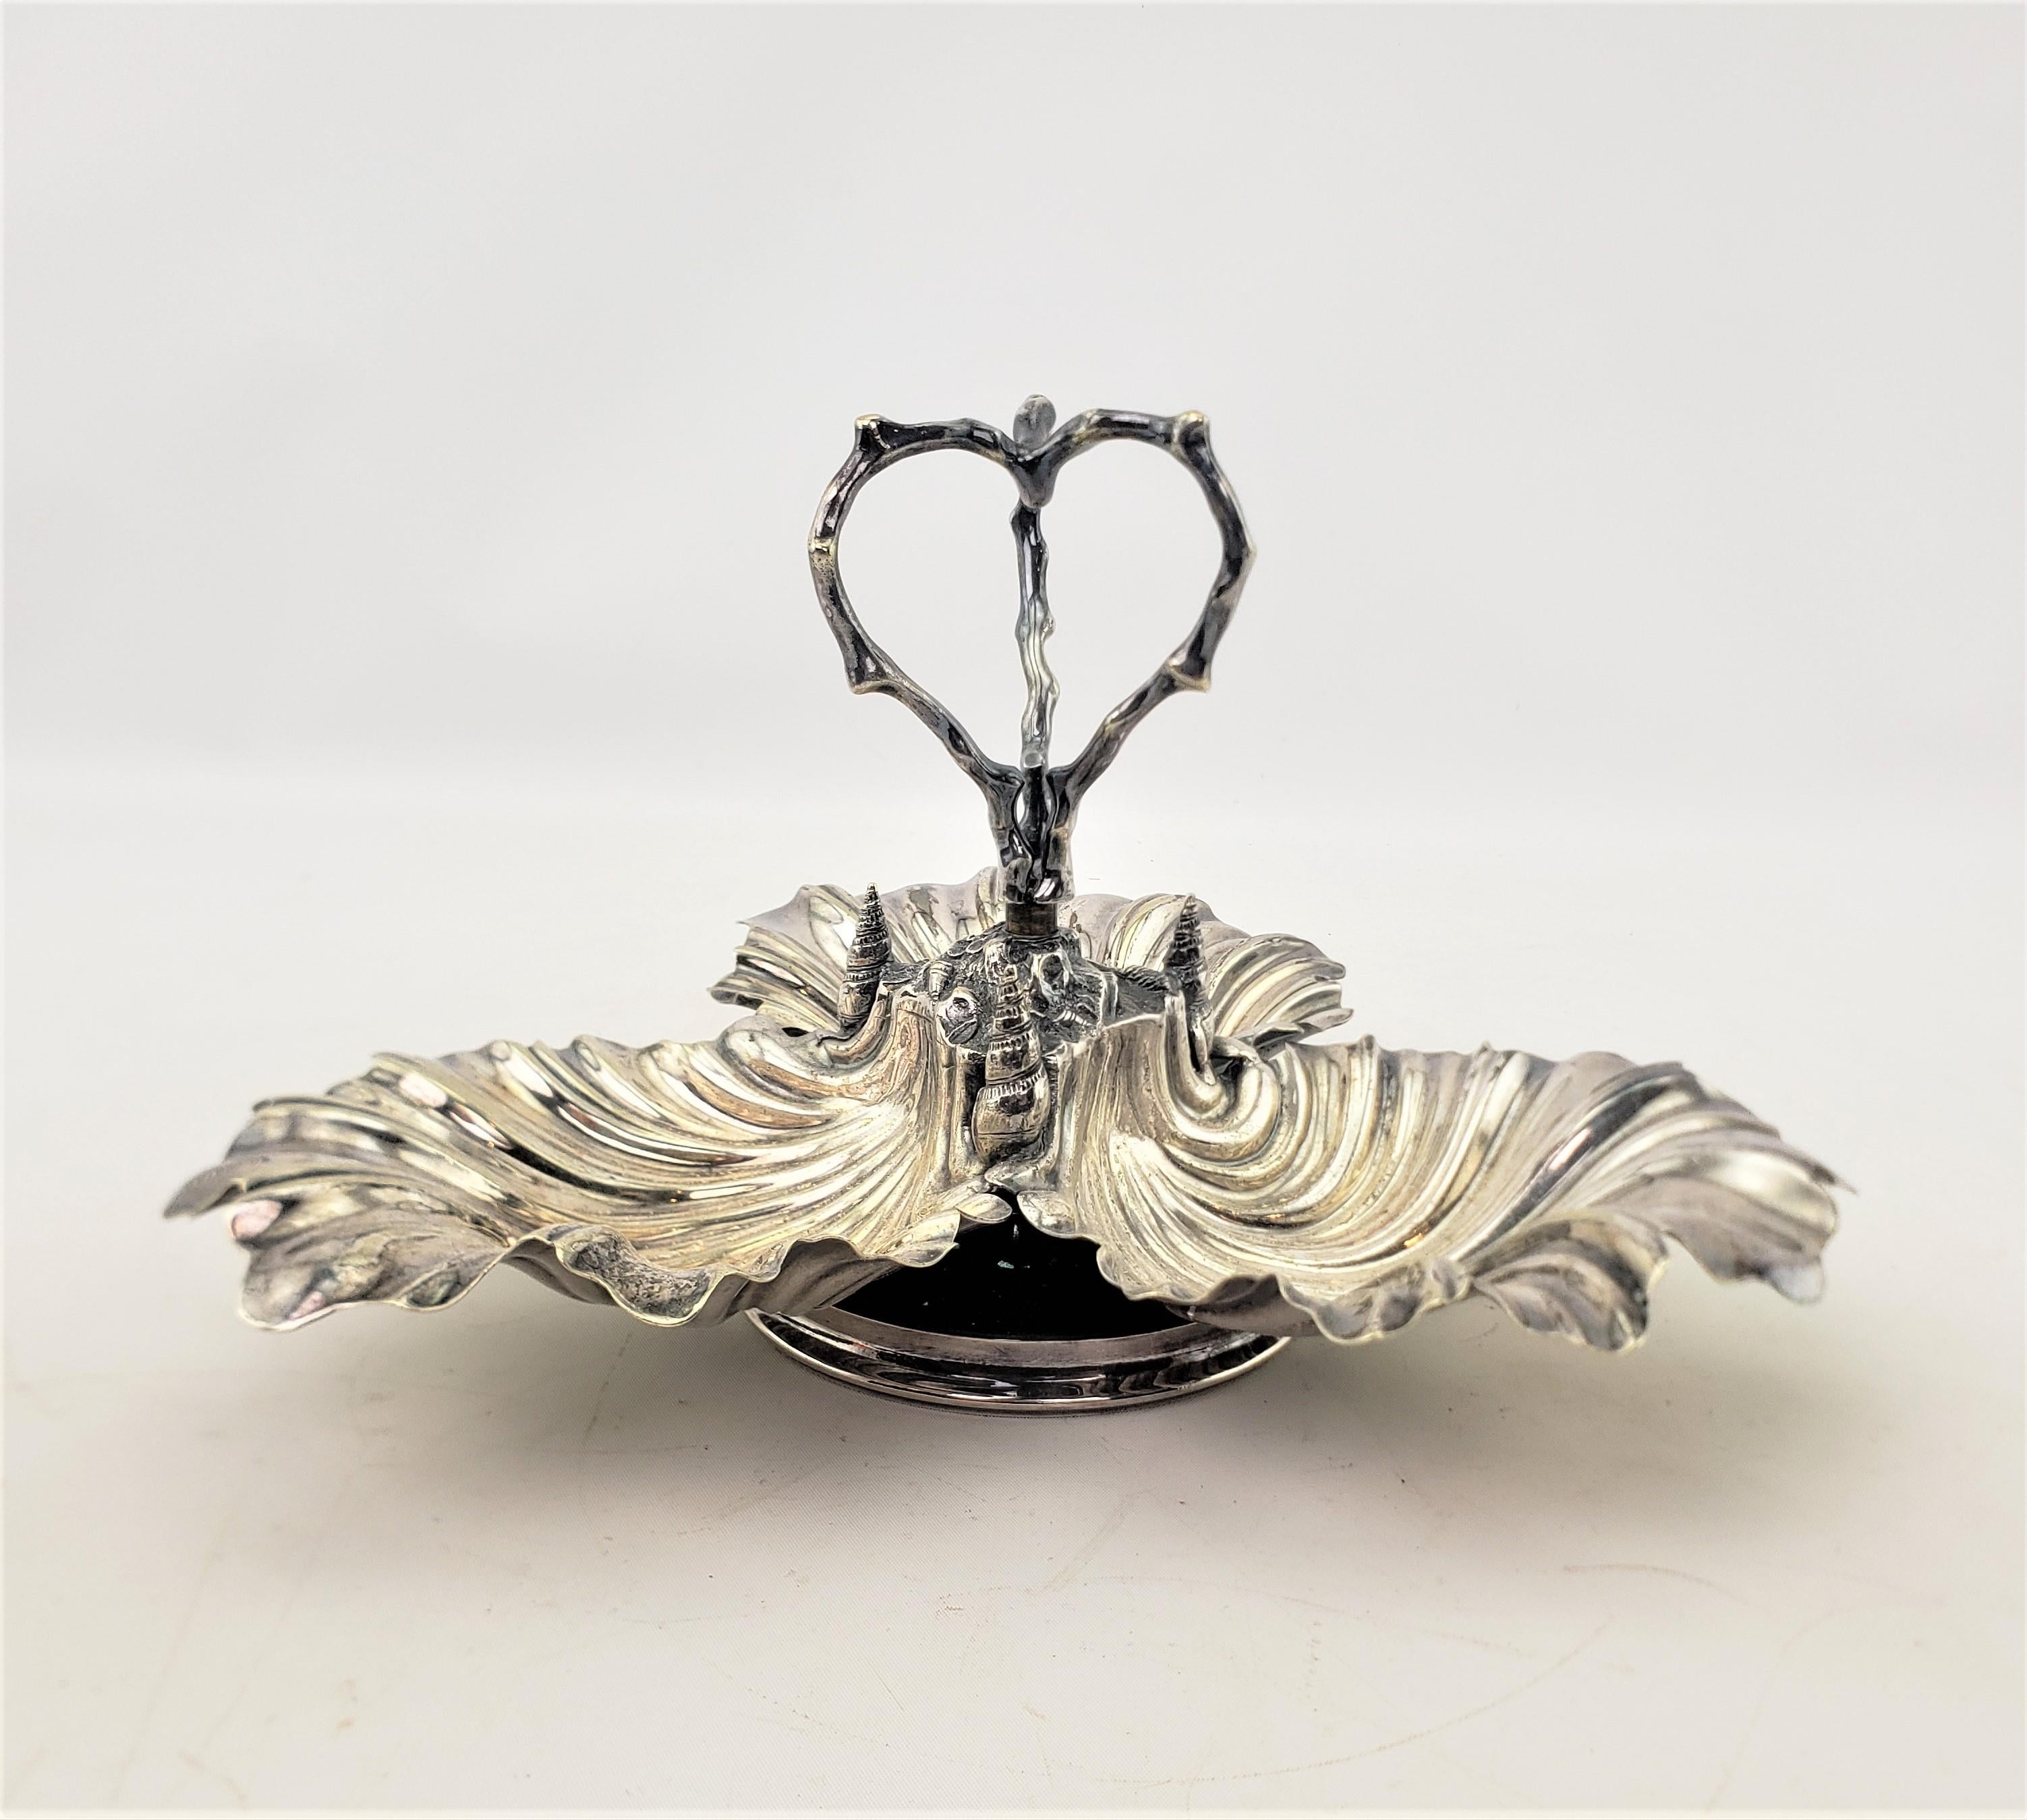 Antique English Silver Plated Partitioned Serving Bowl or Condiment Dish In Good Condition For Sale In Hamilton, Ontario